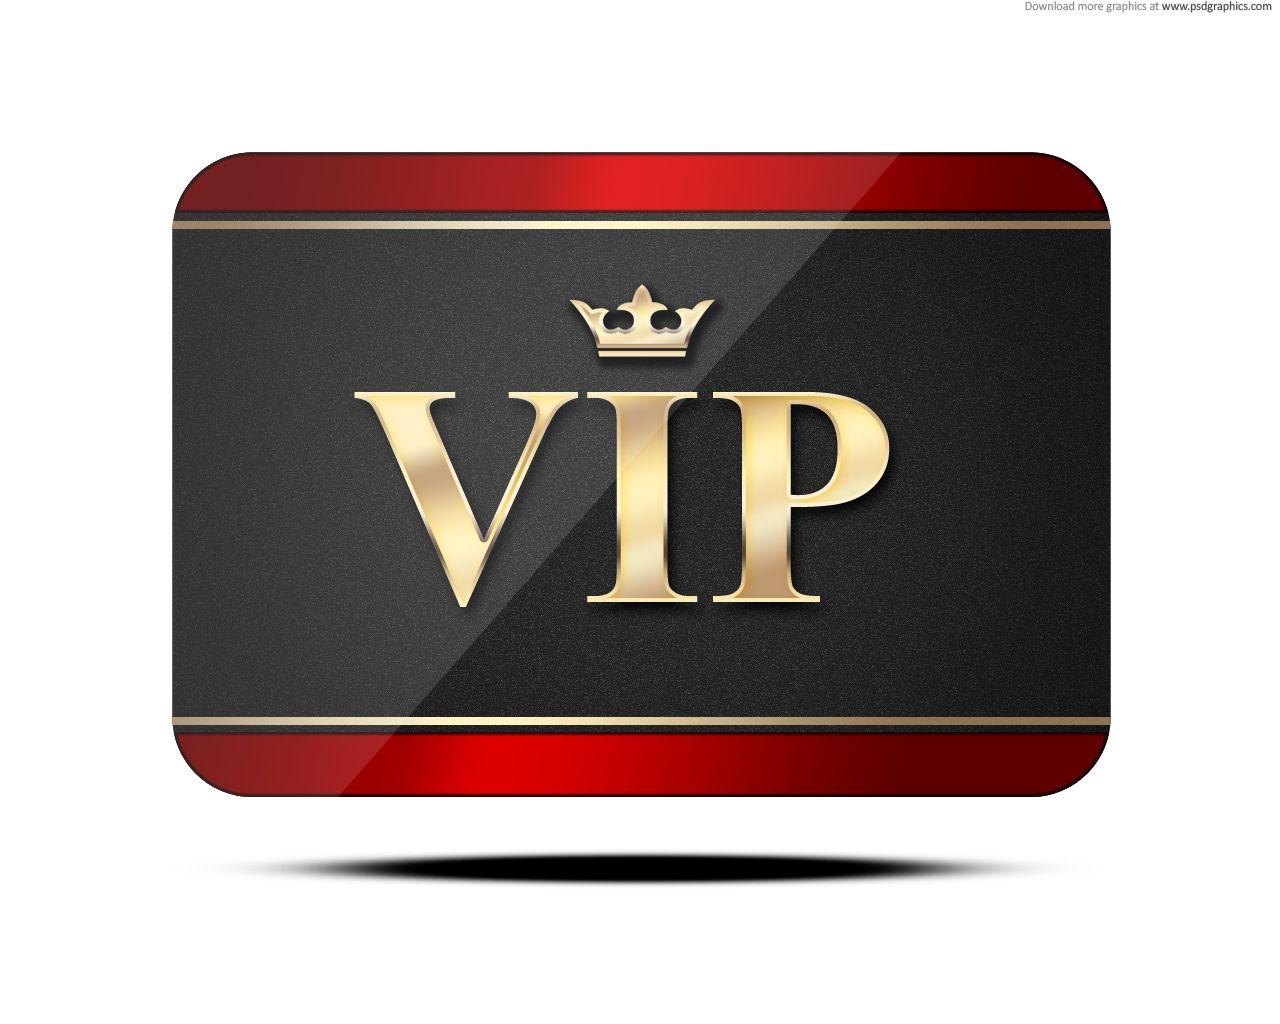 Red Black and Gold Logo - VIP card (PSD)